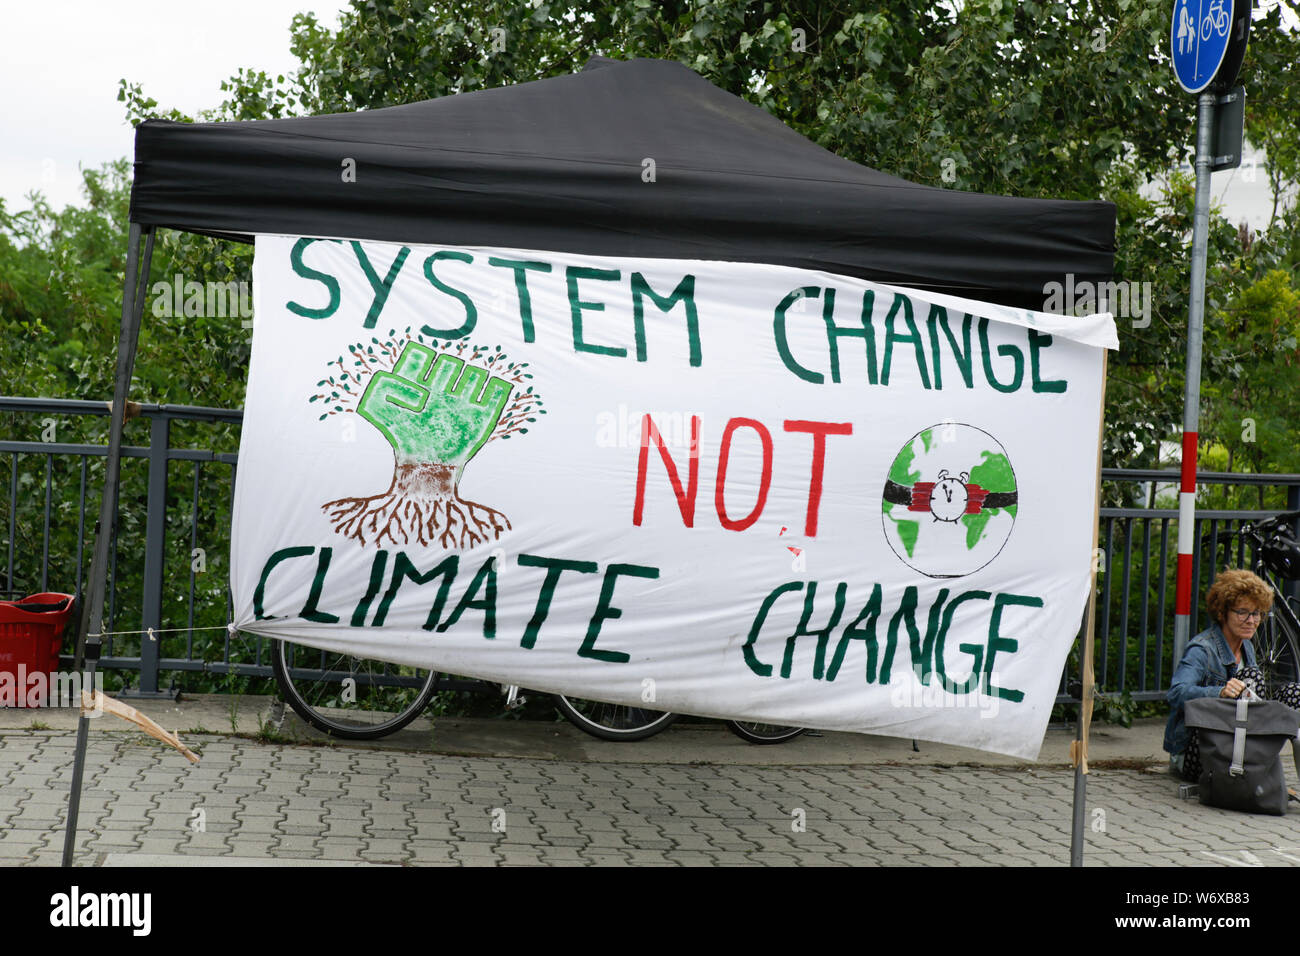 Mannheim, Germany. 3rd August 2019. A banner reads 'System change, not climate change'. Activists from the Ende Gelande organisation have occupied the coal conveyor belt on the large coal power plant in Mannheim. They also block the main entrance of the plant, calling for an end to the use of coal in energy production and the use of renewable energy sources. Stock Photo